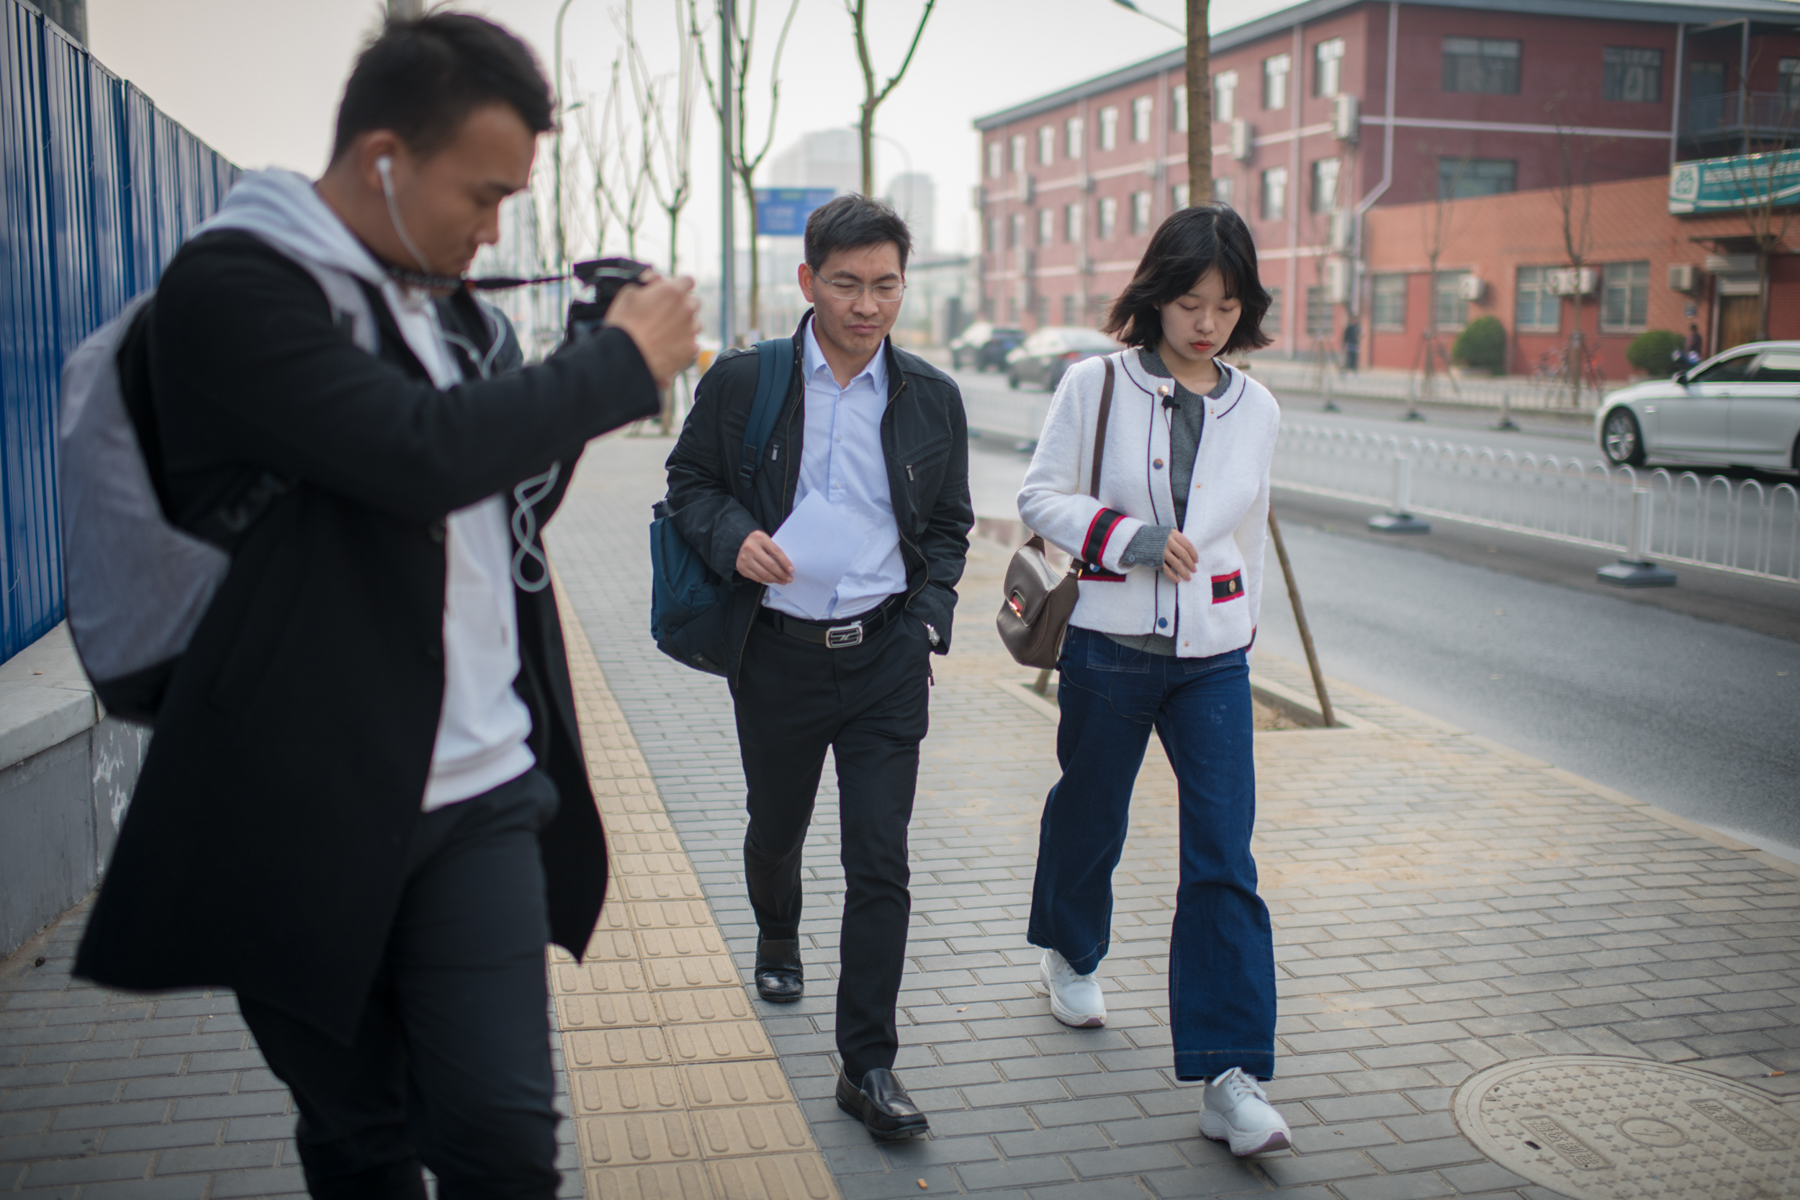 Zhou and her lawyer, Wang Fei, discuss the lawsuits, October 22. One person with knowledge of the alleged assault who now resides abroad refused to be listed as a witness. She said, “I don’t want to stir up all that stuff that happened back in China.”